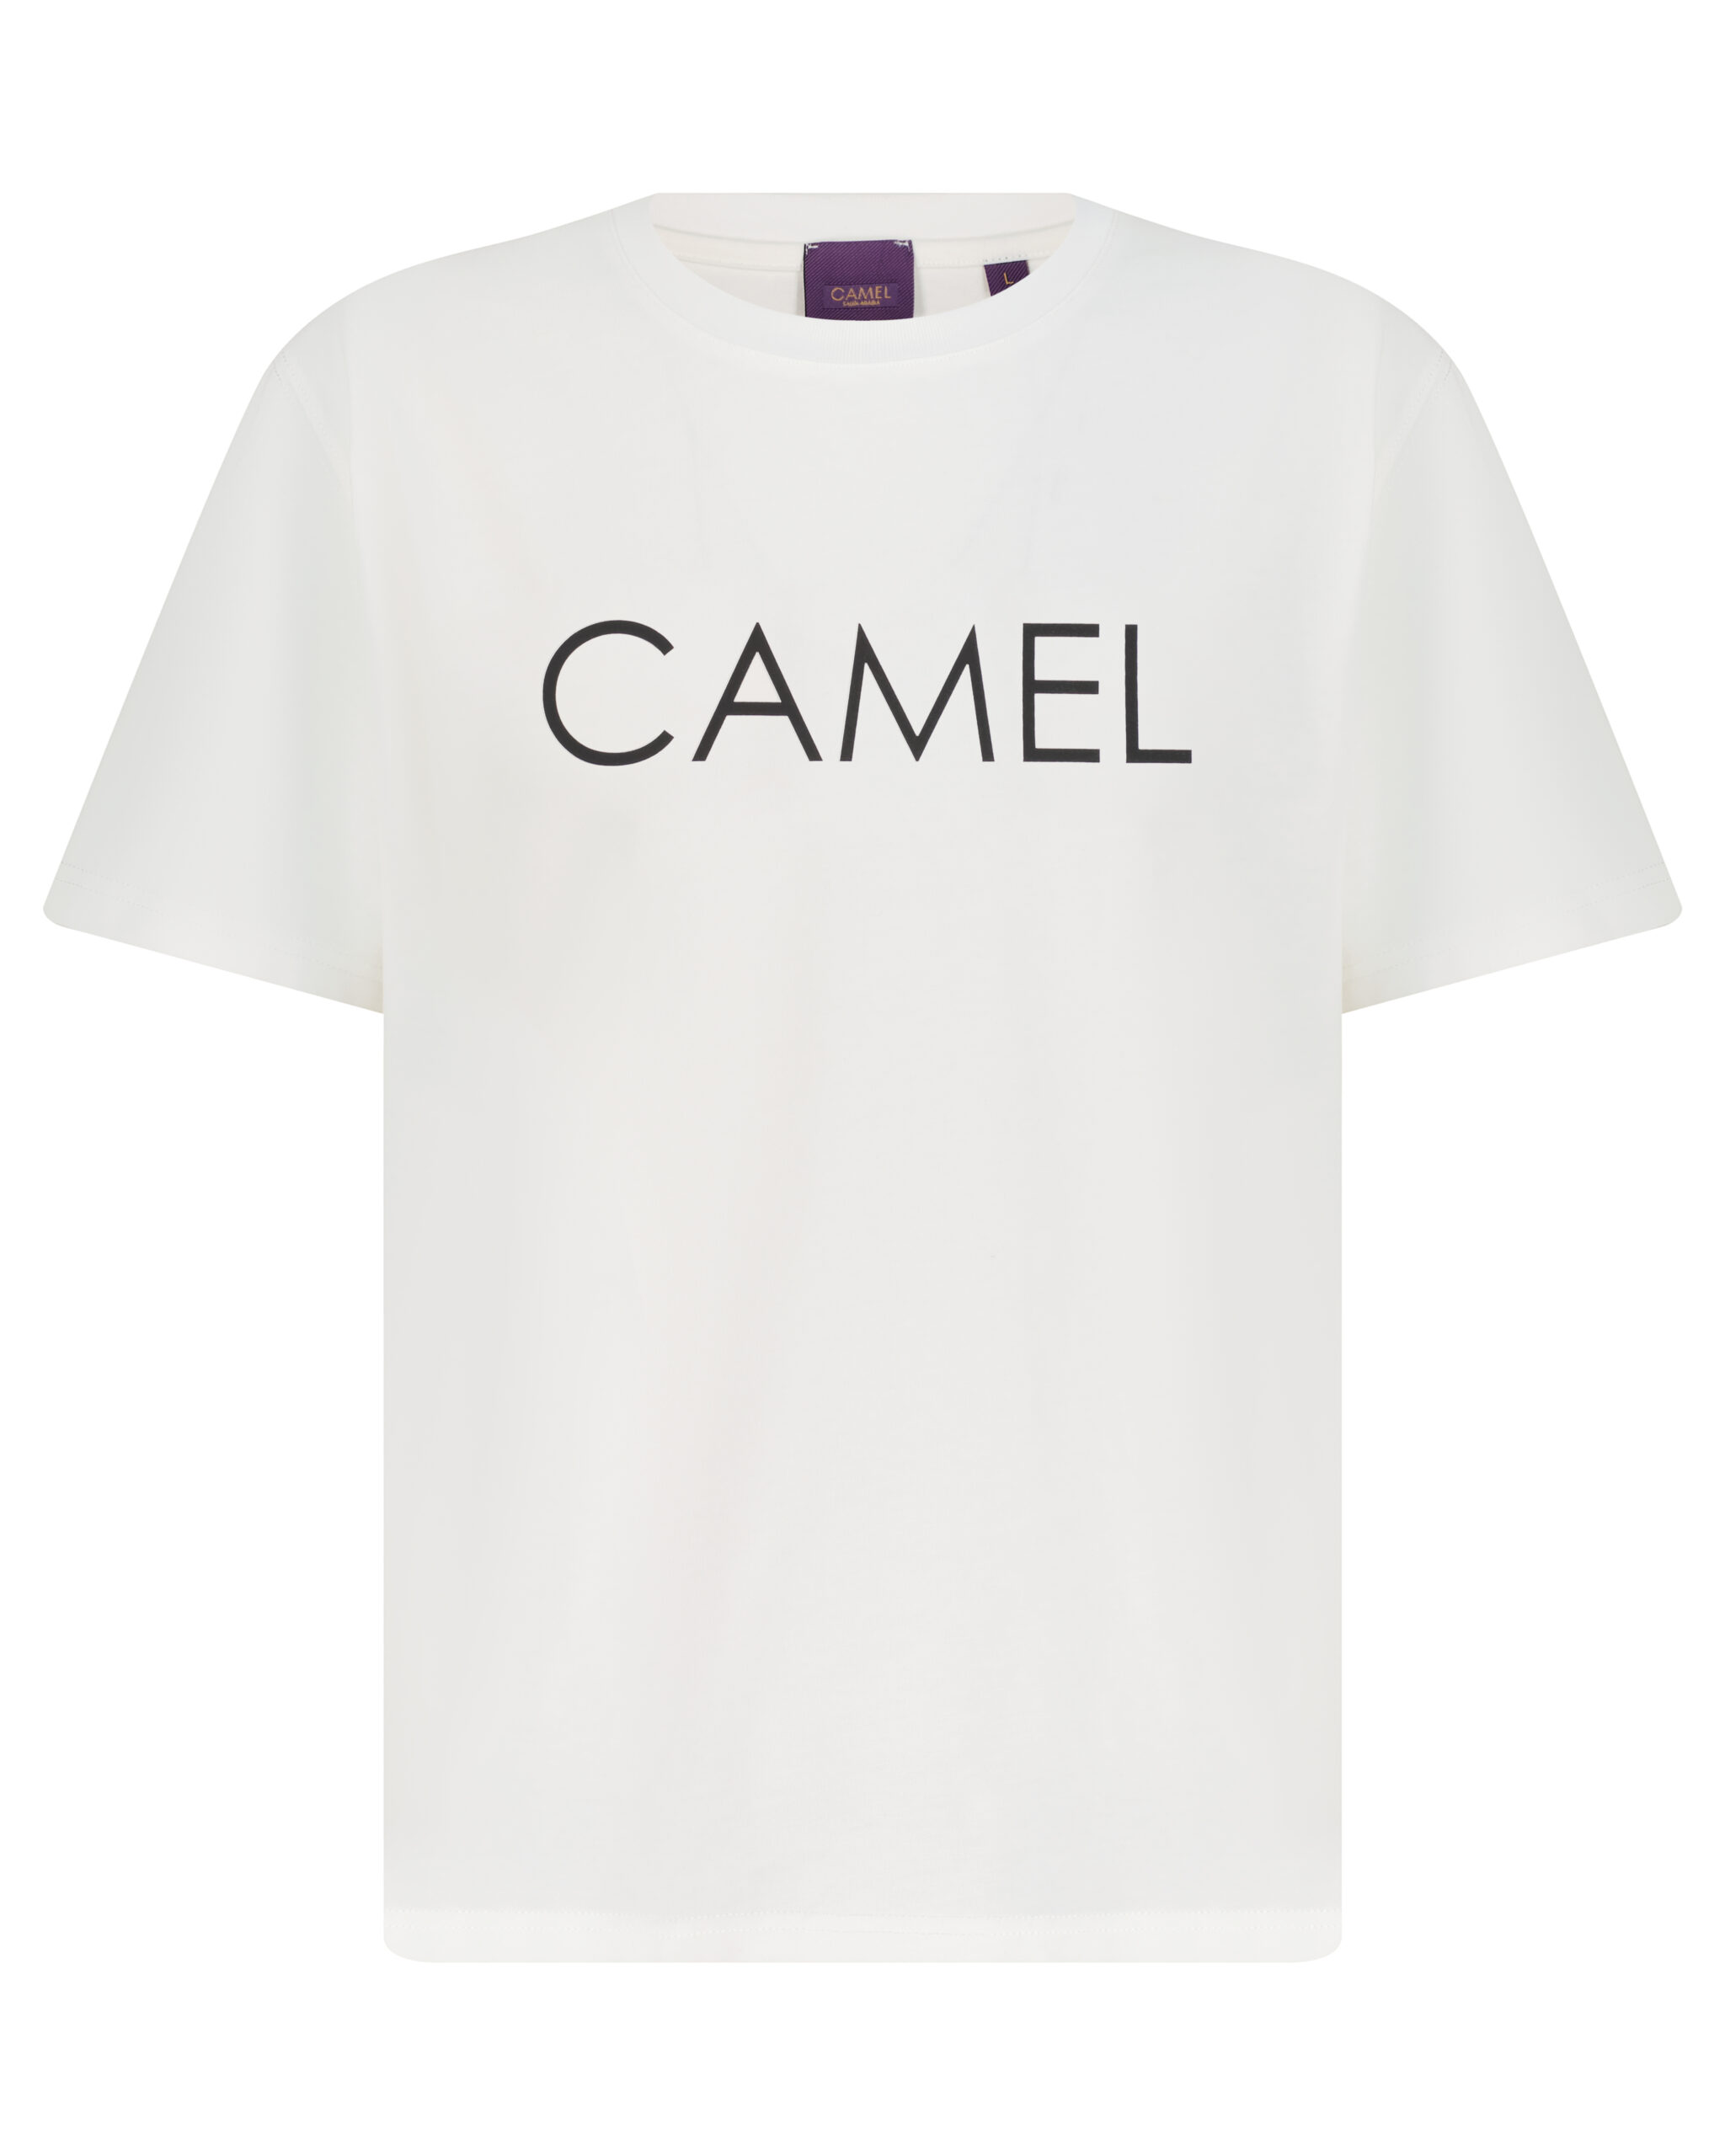 White T-Shirt Slim Fit By Camel Brand